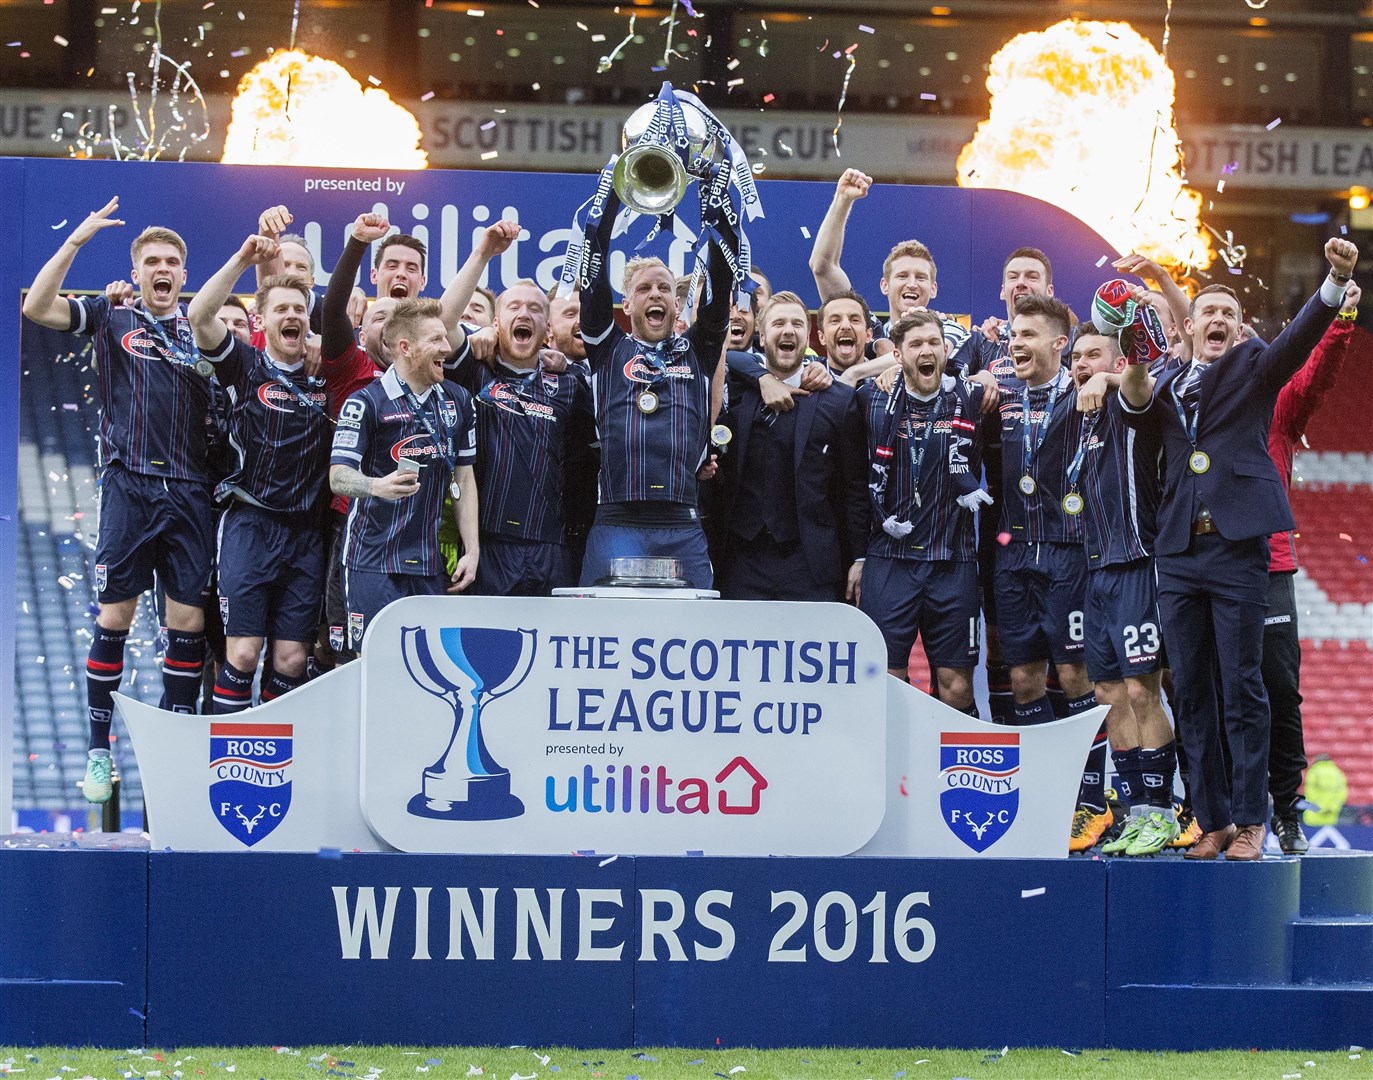 Ross County lifted the League Cup in 2016 after a 2-1 win over Hibernian in the final. Picture: Ken Macpherson